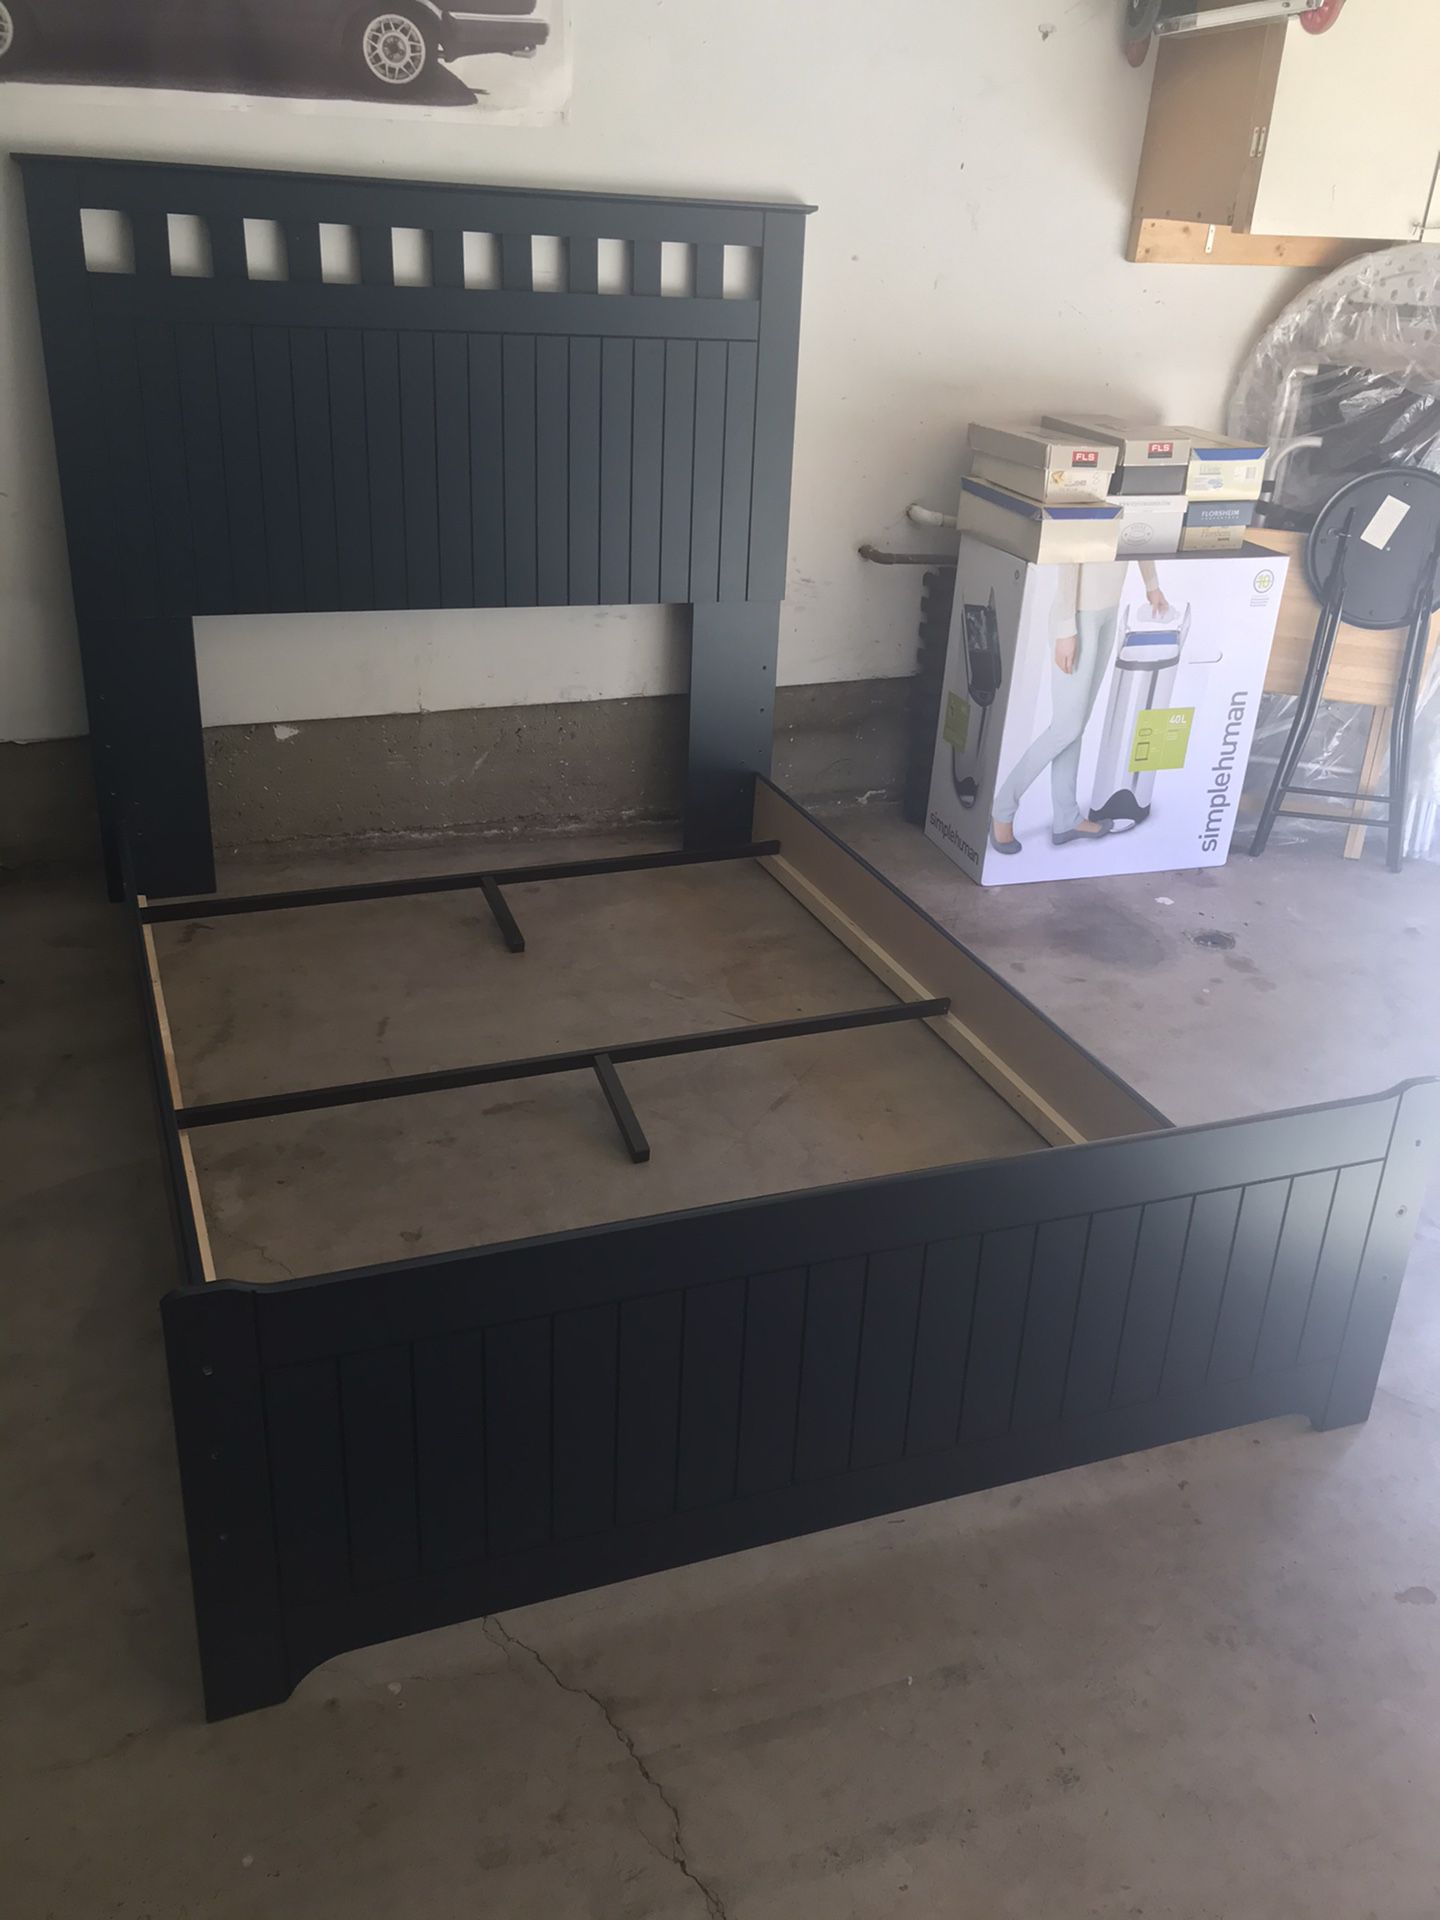 Queen bed frame and Queen mattress and box spring